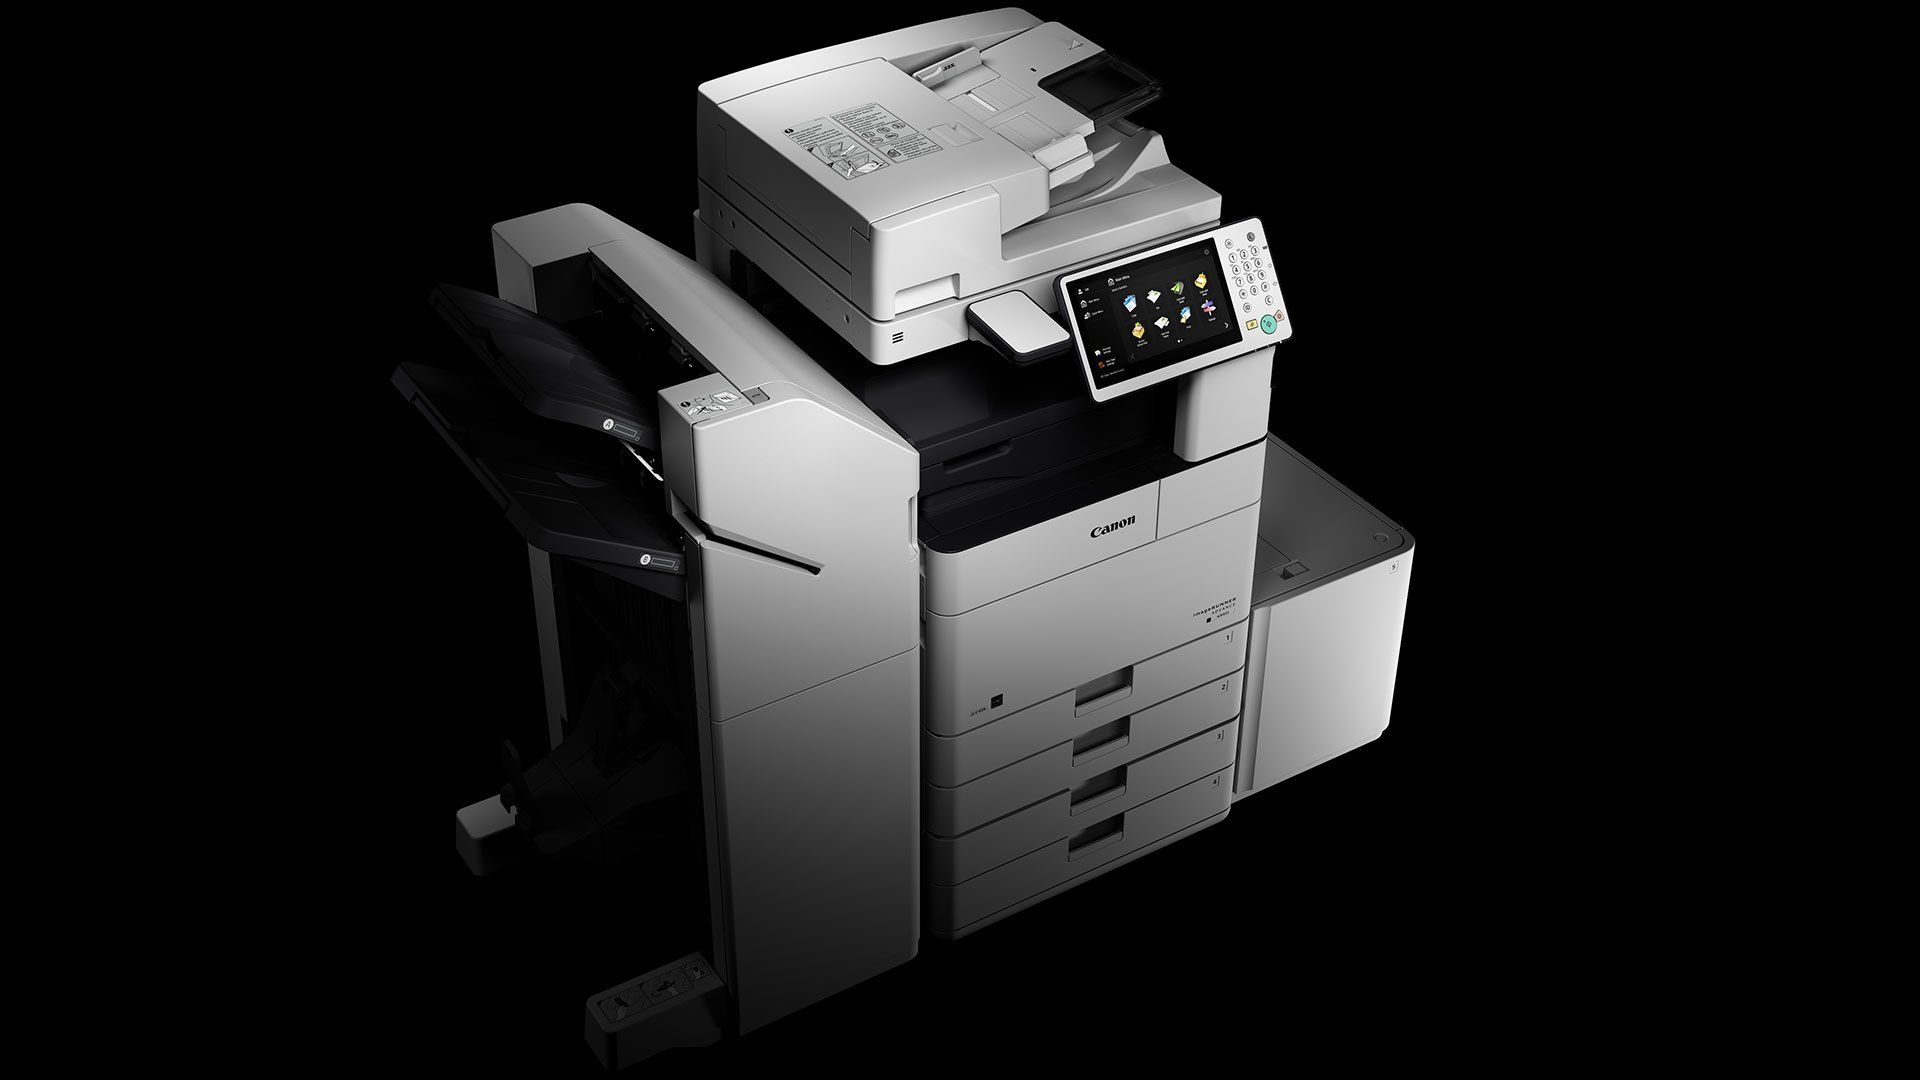 Canon imageRUNNER ADVANCE 4500 Series - Business Printers & Fax